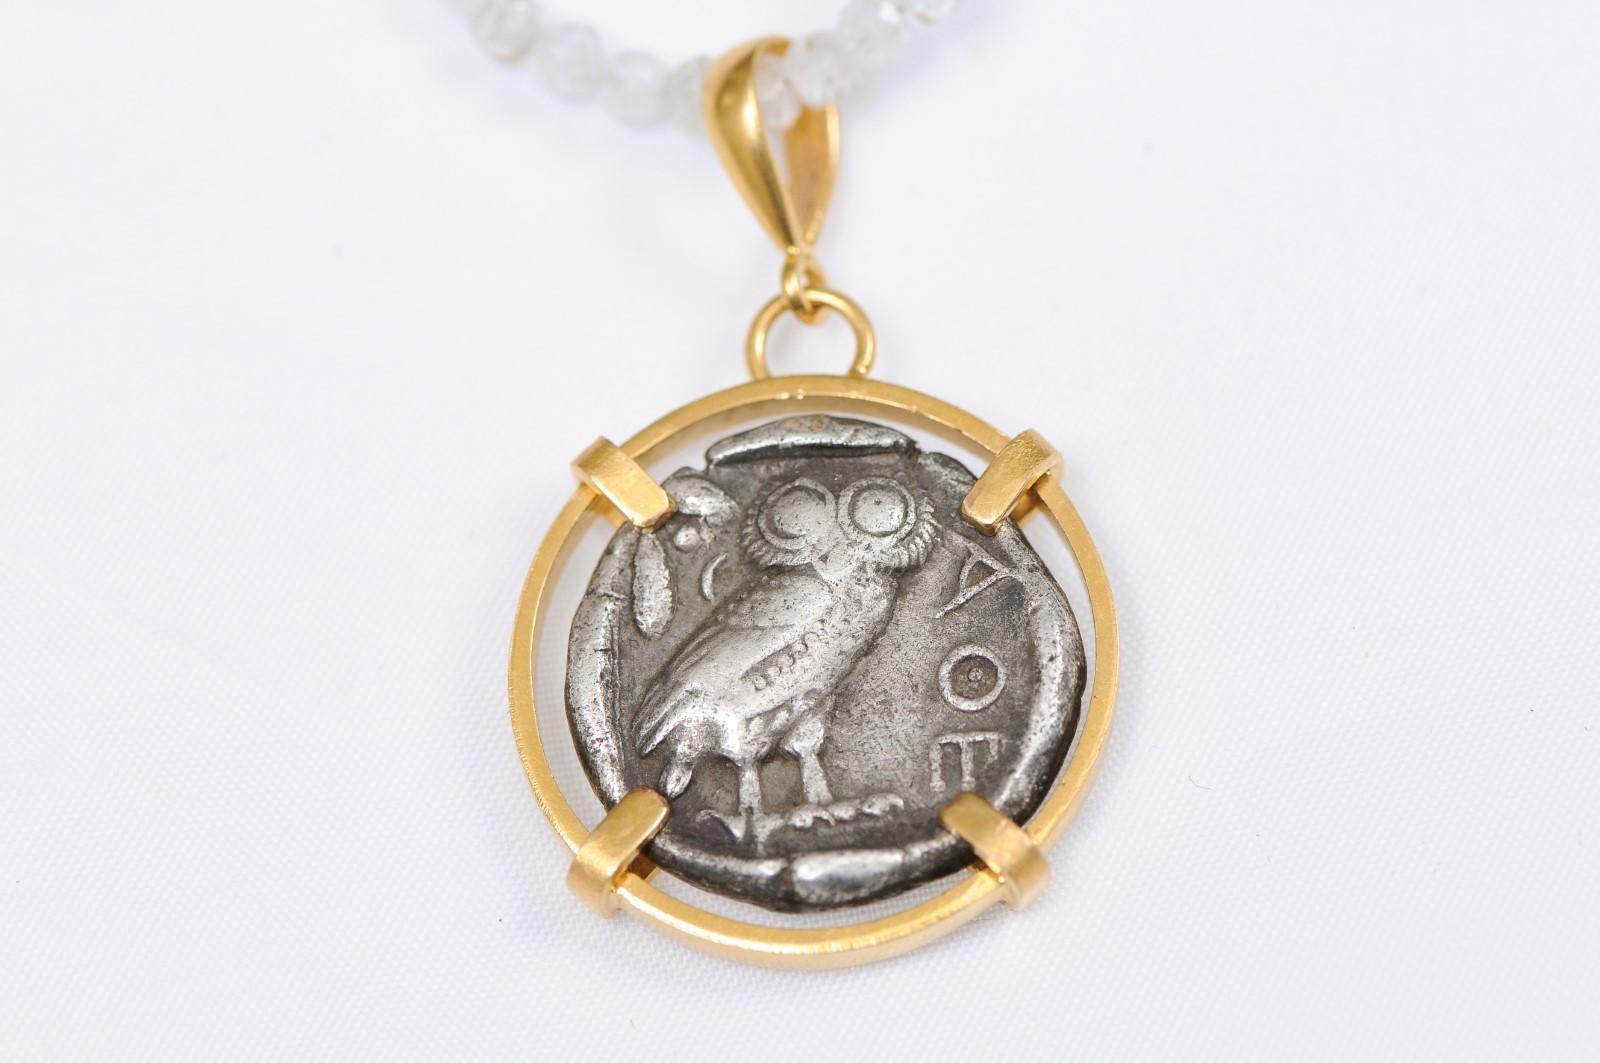 An authentic Greek, Attica, Athens Tetradrachm Owl/Athena coin (circa 430-420 BC), set in a custom rounded, suspended style, 22k gold bezel with 22k gold bail. The obverse, or front side of this coin features the head of Athena, right, wearing a